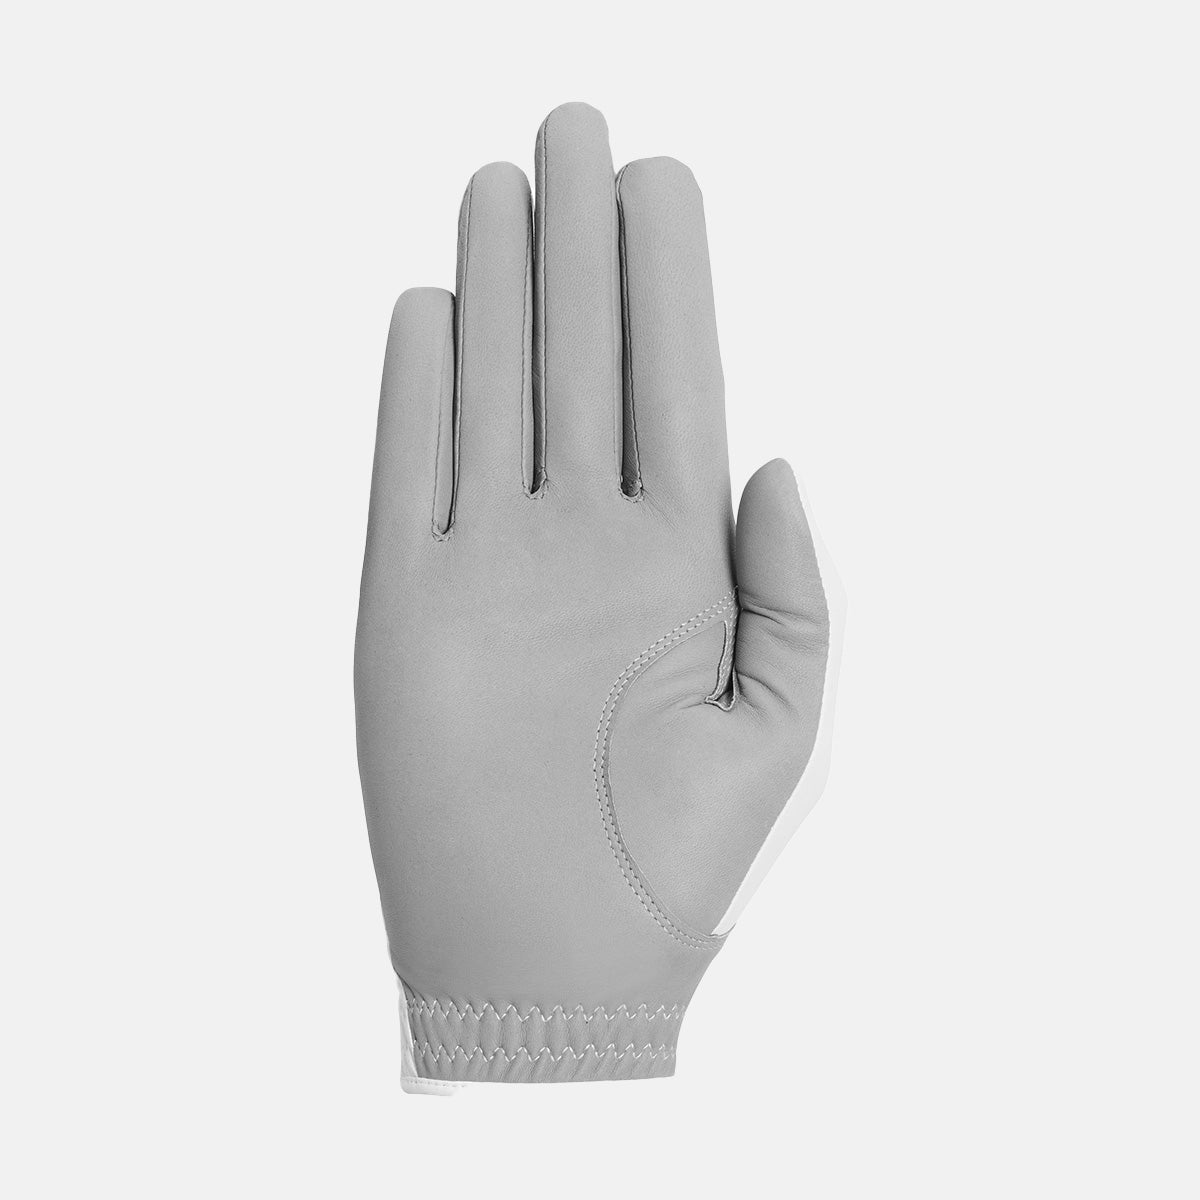 Duca del Cosma left golf glove for women's with cabretta leather and microfiber for a perfect fit